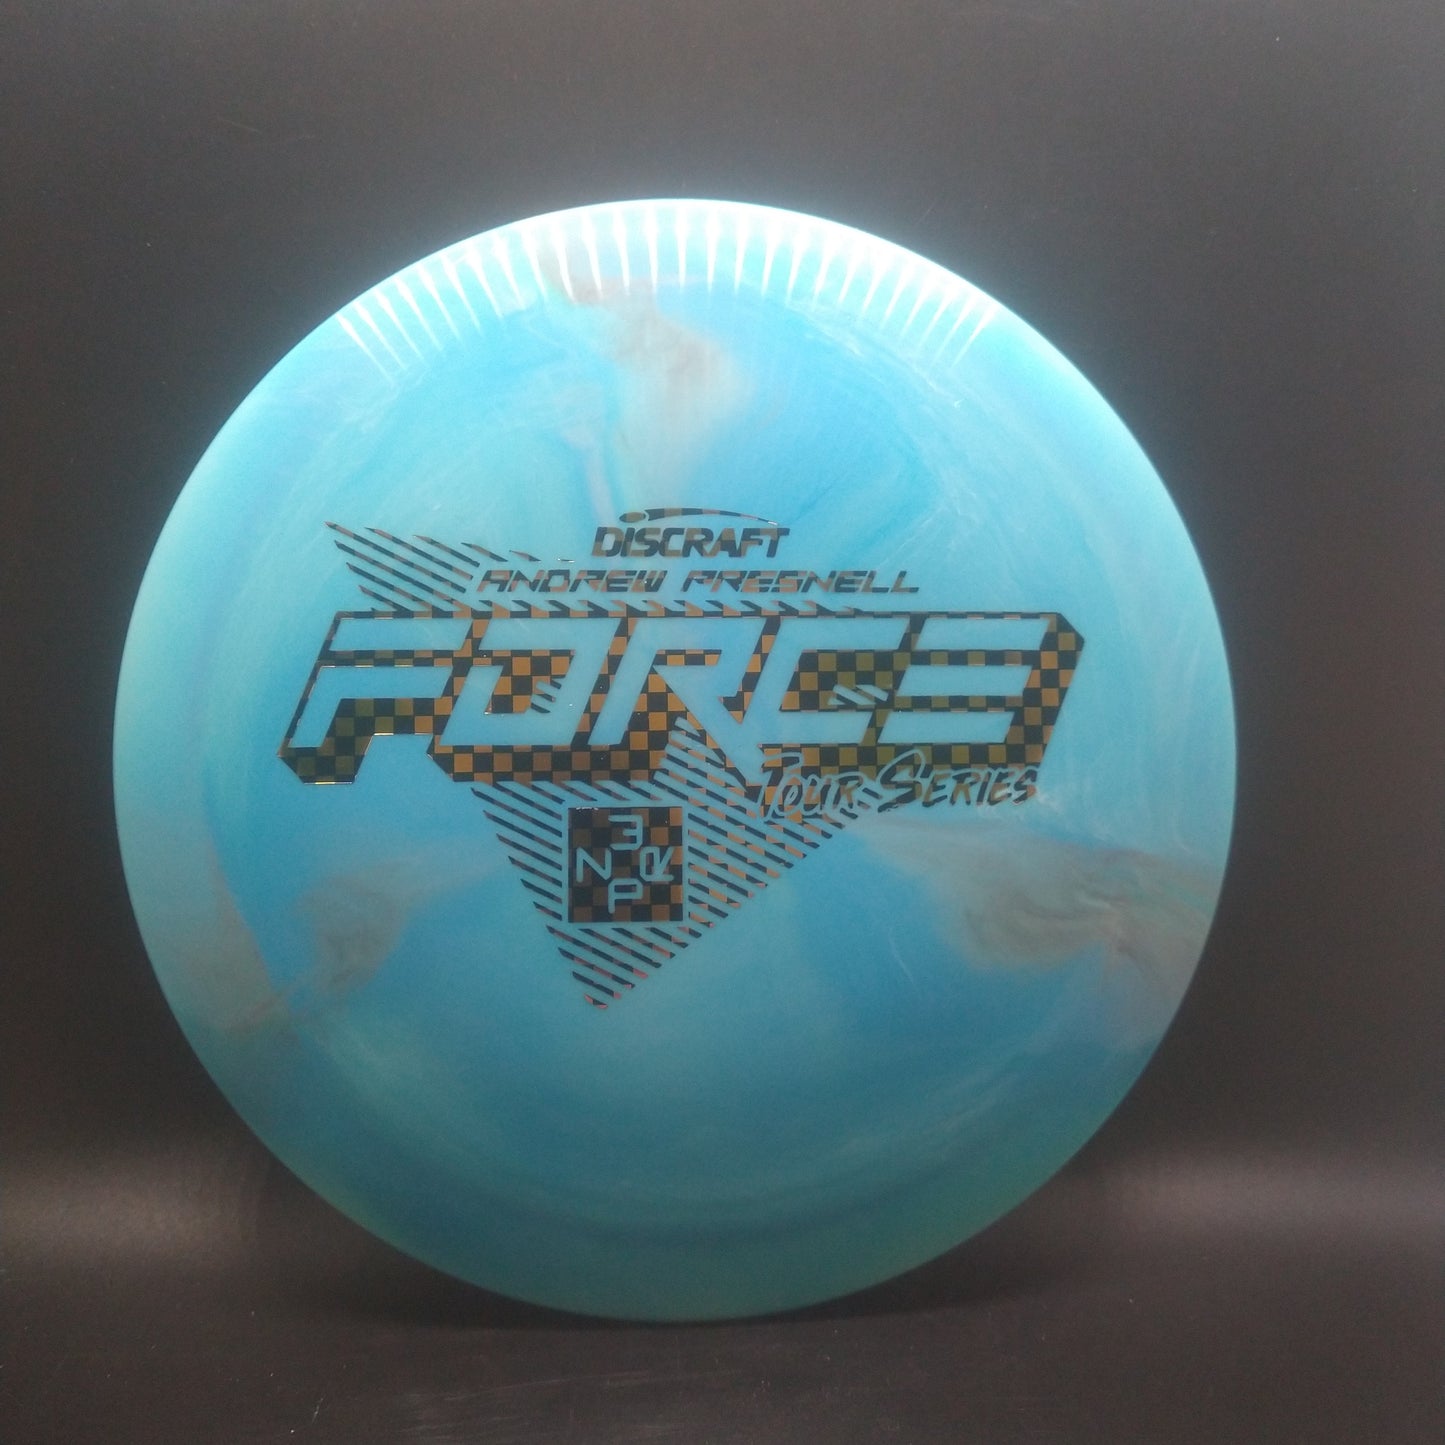 Discraft Esp Andrew Presnell Force Blue 173-4g